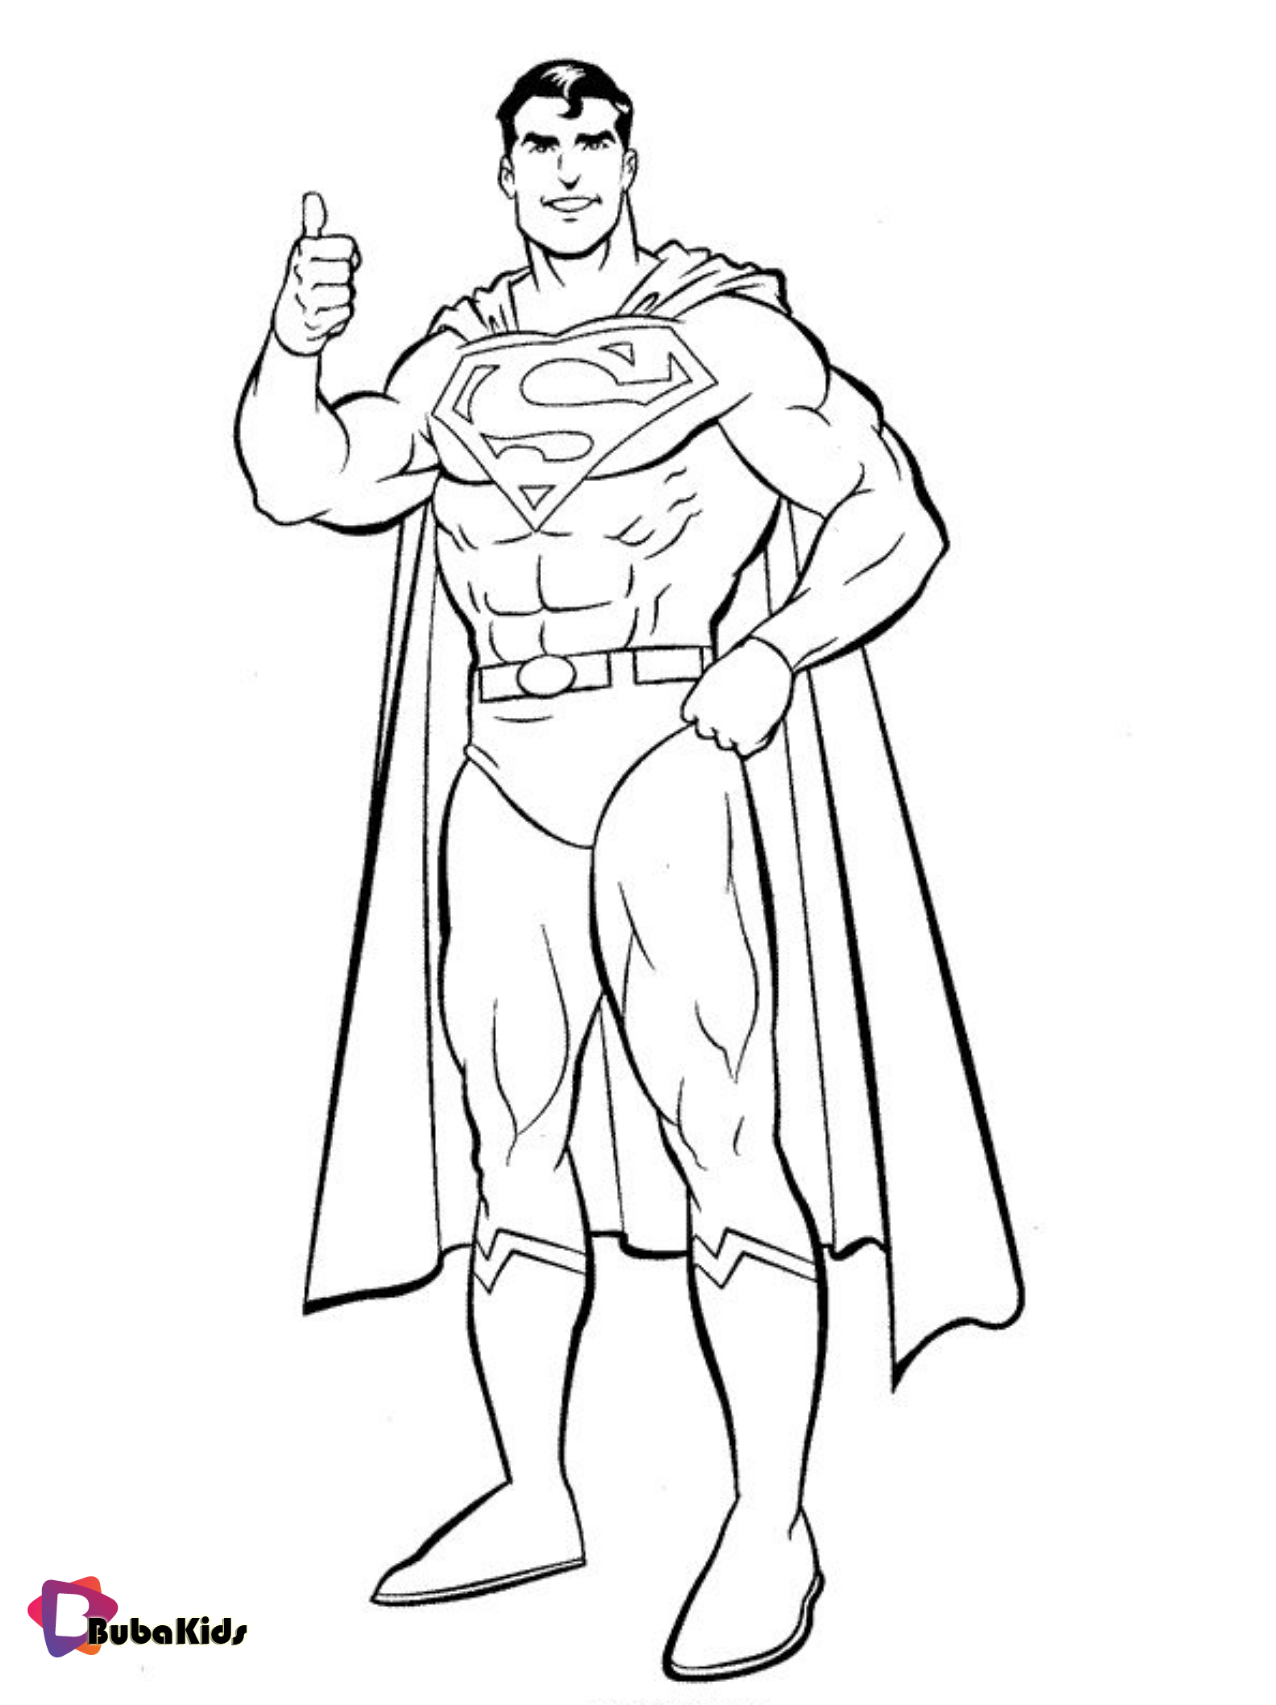 Superman coloring pages | Superman Printable Coloring Pages Wallpaper